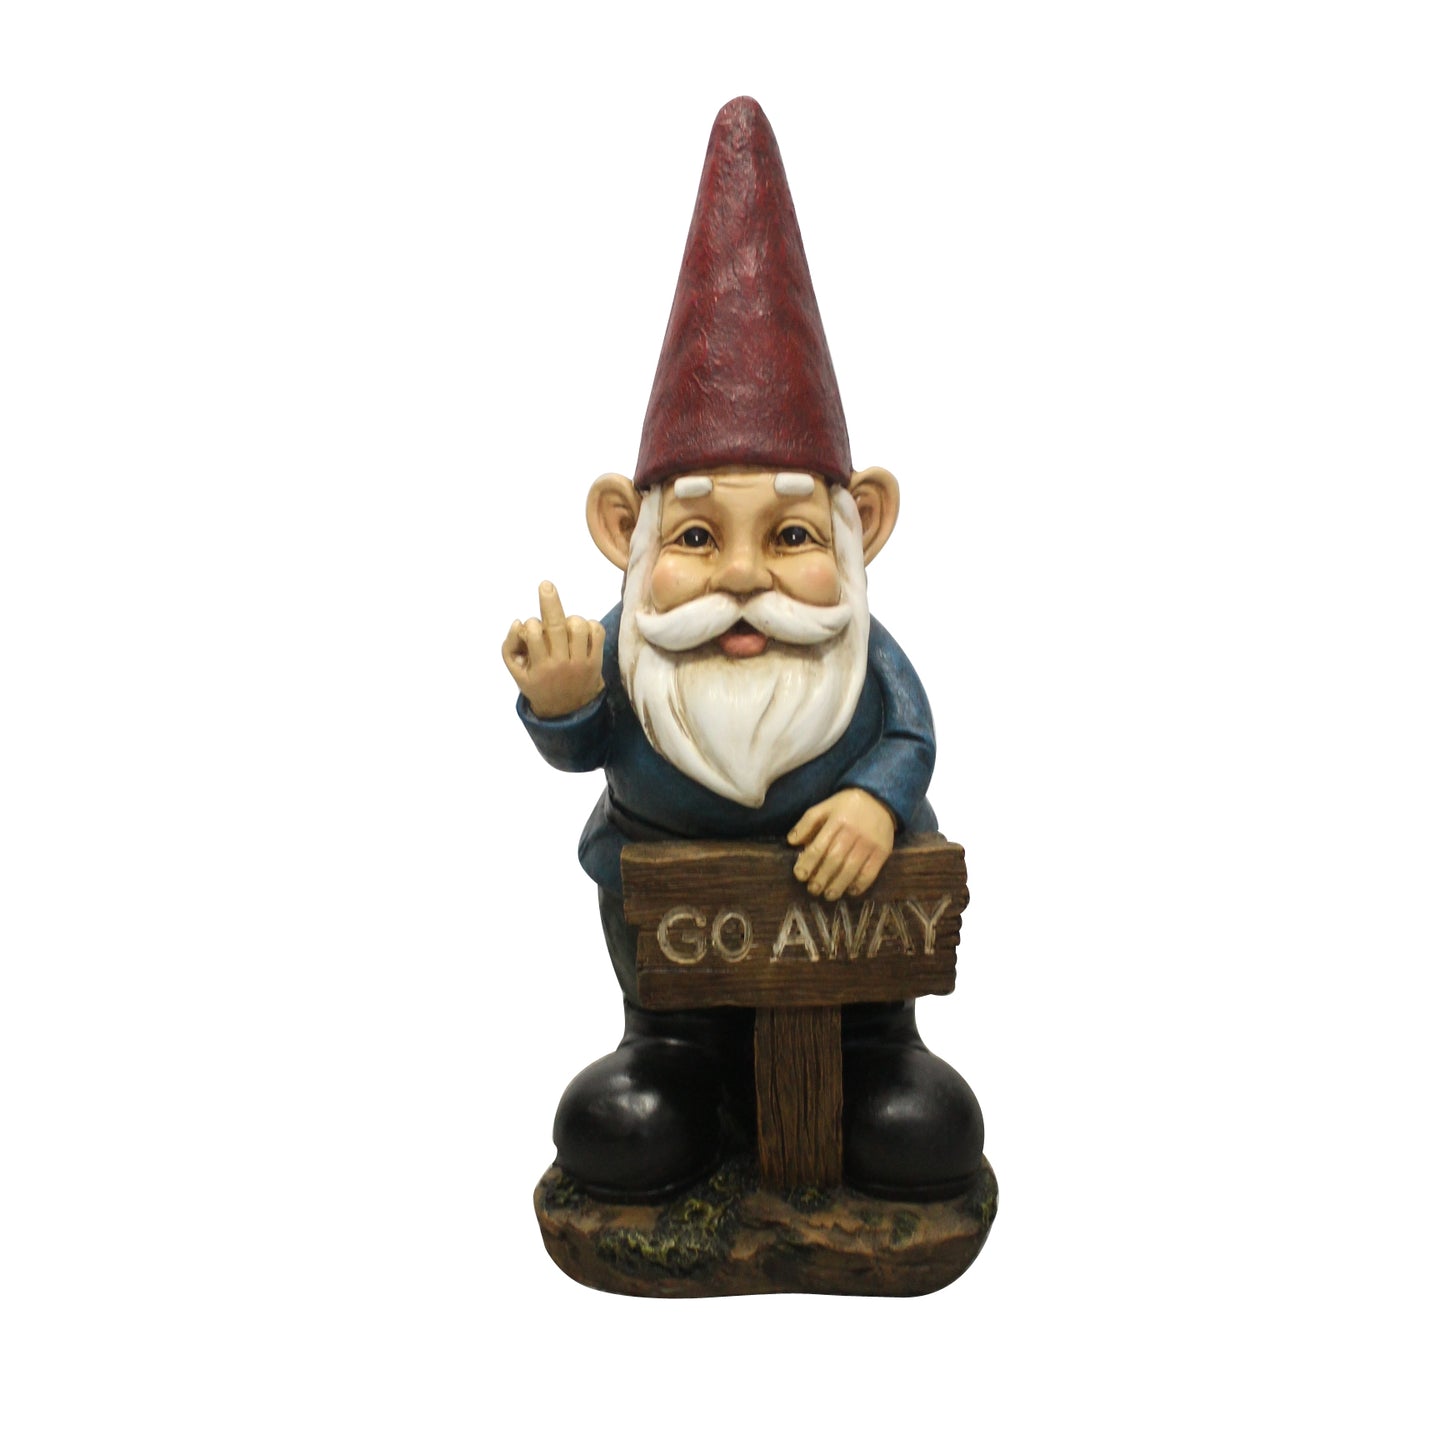 75614 - Gnome Holding A Go Away Sign